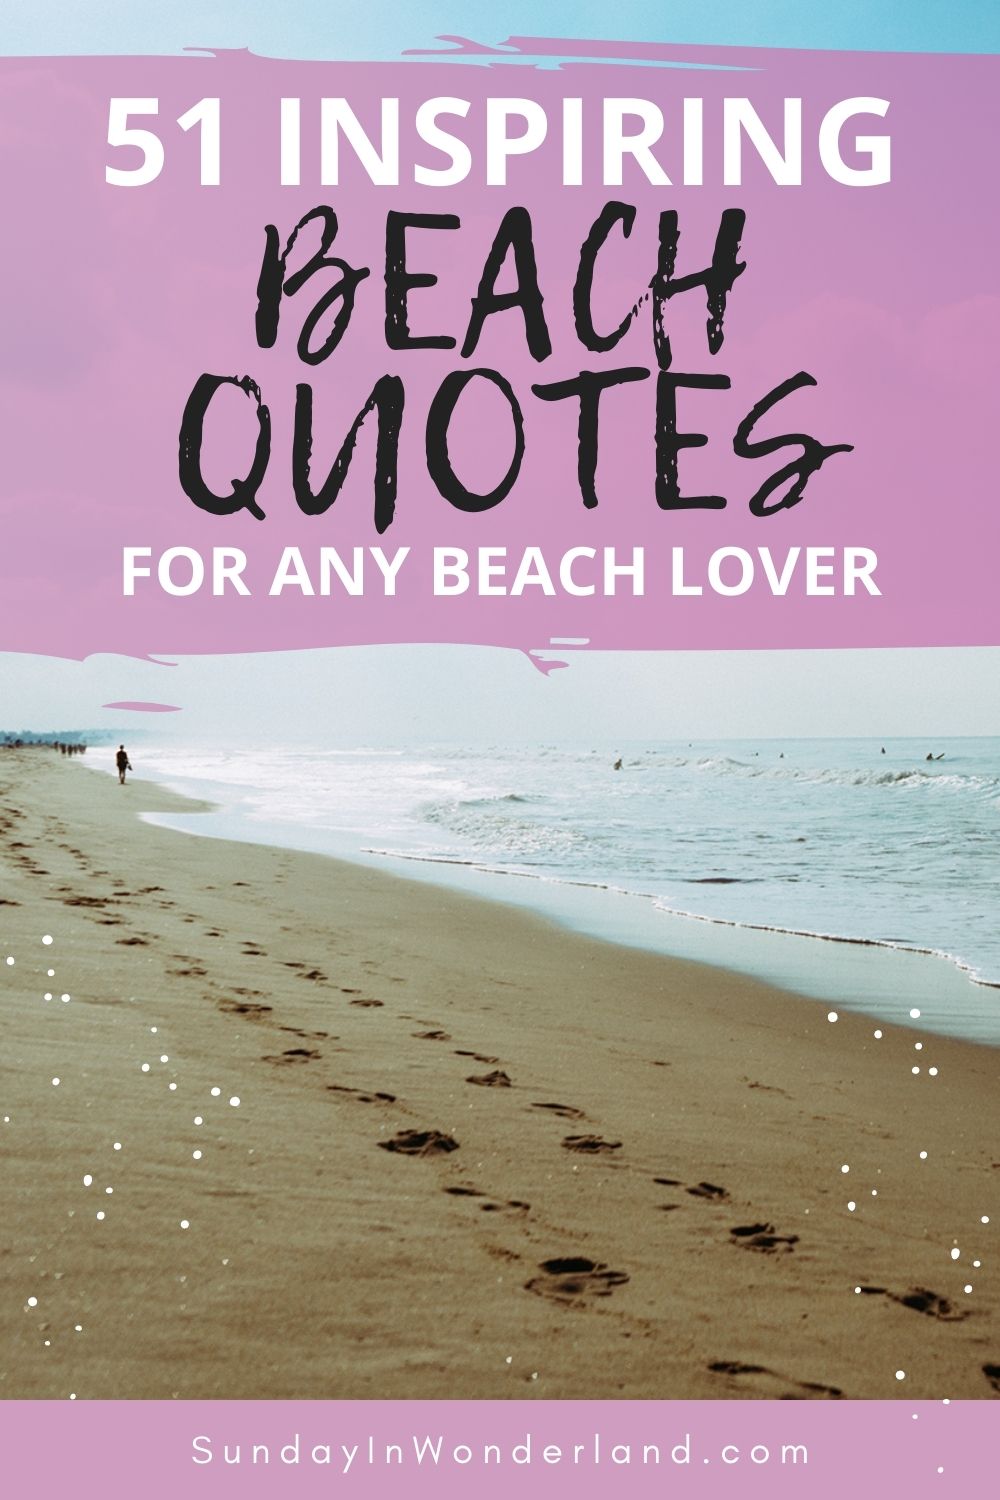 51 inspiring beach quotes for any beach lover